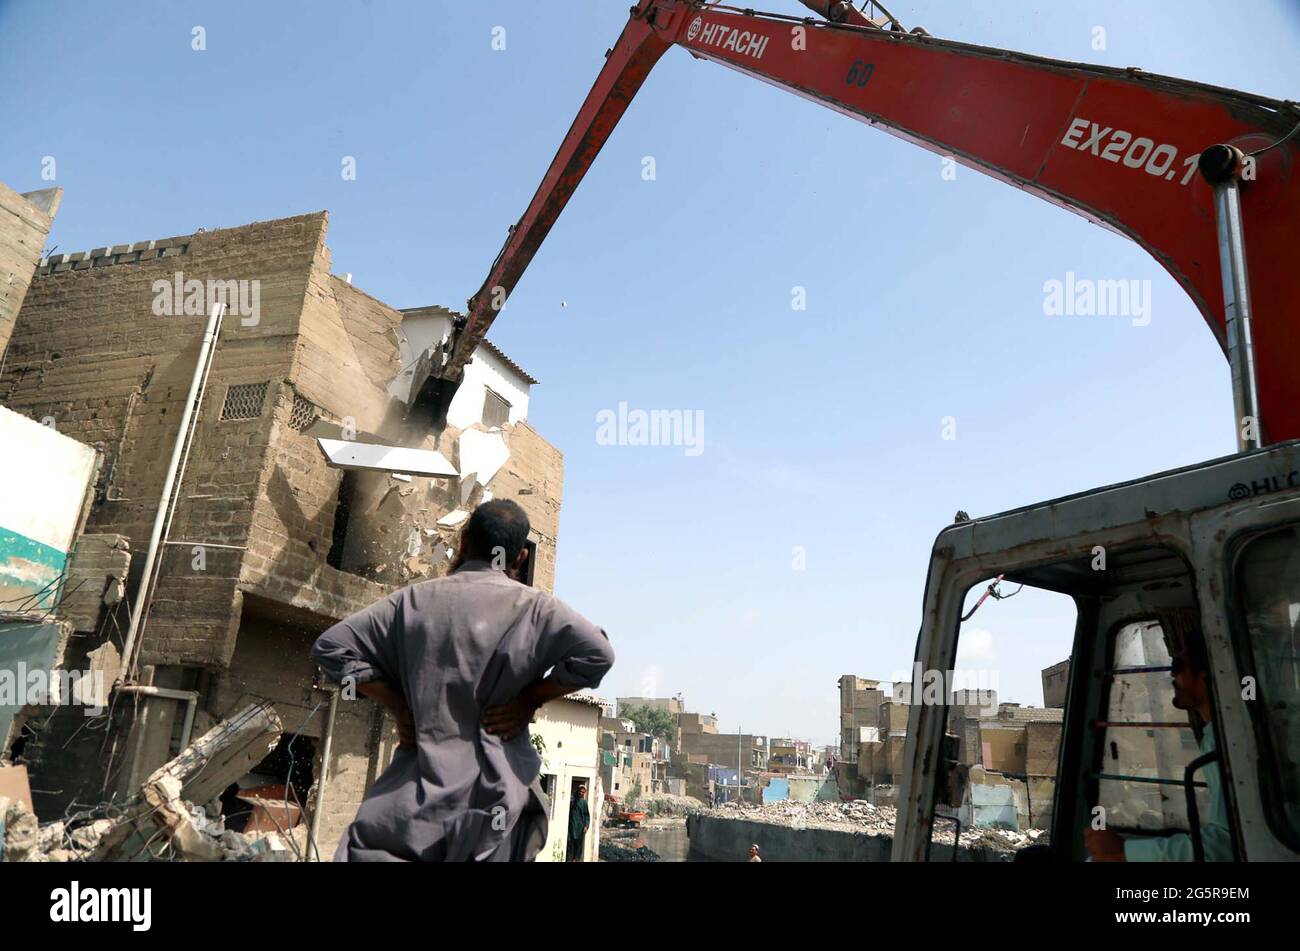 Quetta, Pakistan, June 29, 2021. Heavy machinery and workers busy in demolish encroachments established along with the local Nullah during anti-encroachment campaign under the supervision of Karachi Municipal Corporation (KMC), located on Liaquatabad Chuna Dipo area of Karachi on Tuesday, June 29, 2021. Stock Photo